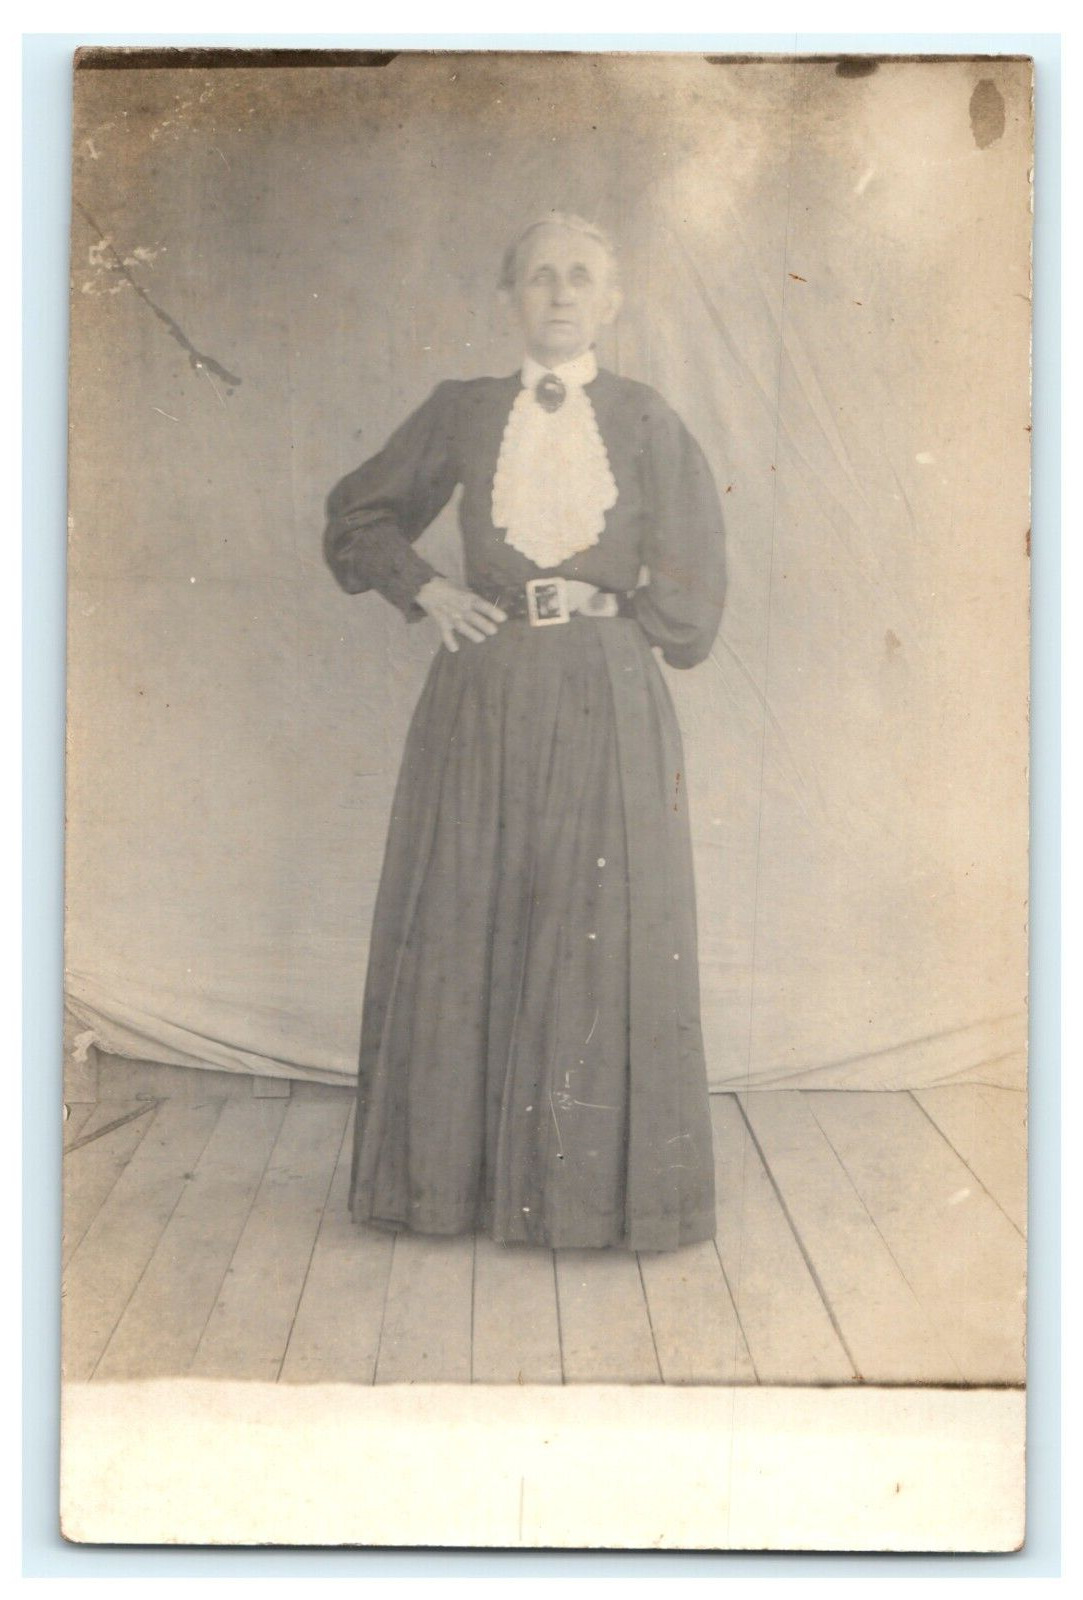 1913 Your Sister Nancy A Fouts? 62 Yrs Old RPPC Portrait Older Woman